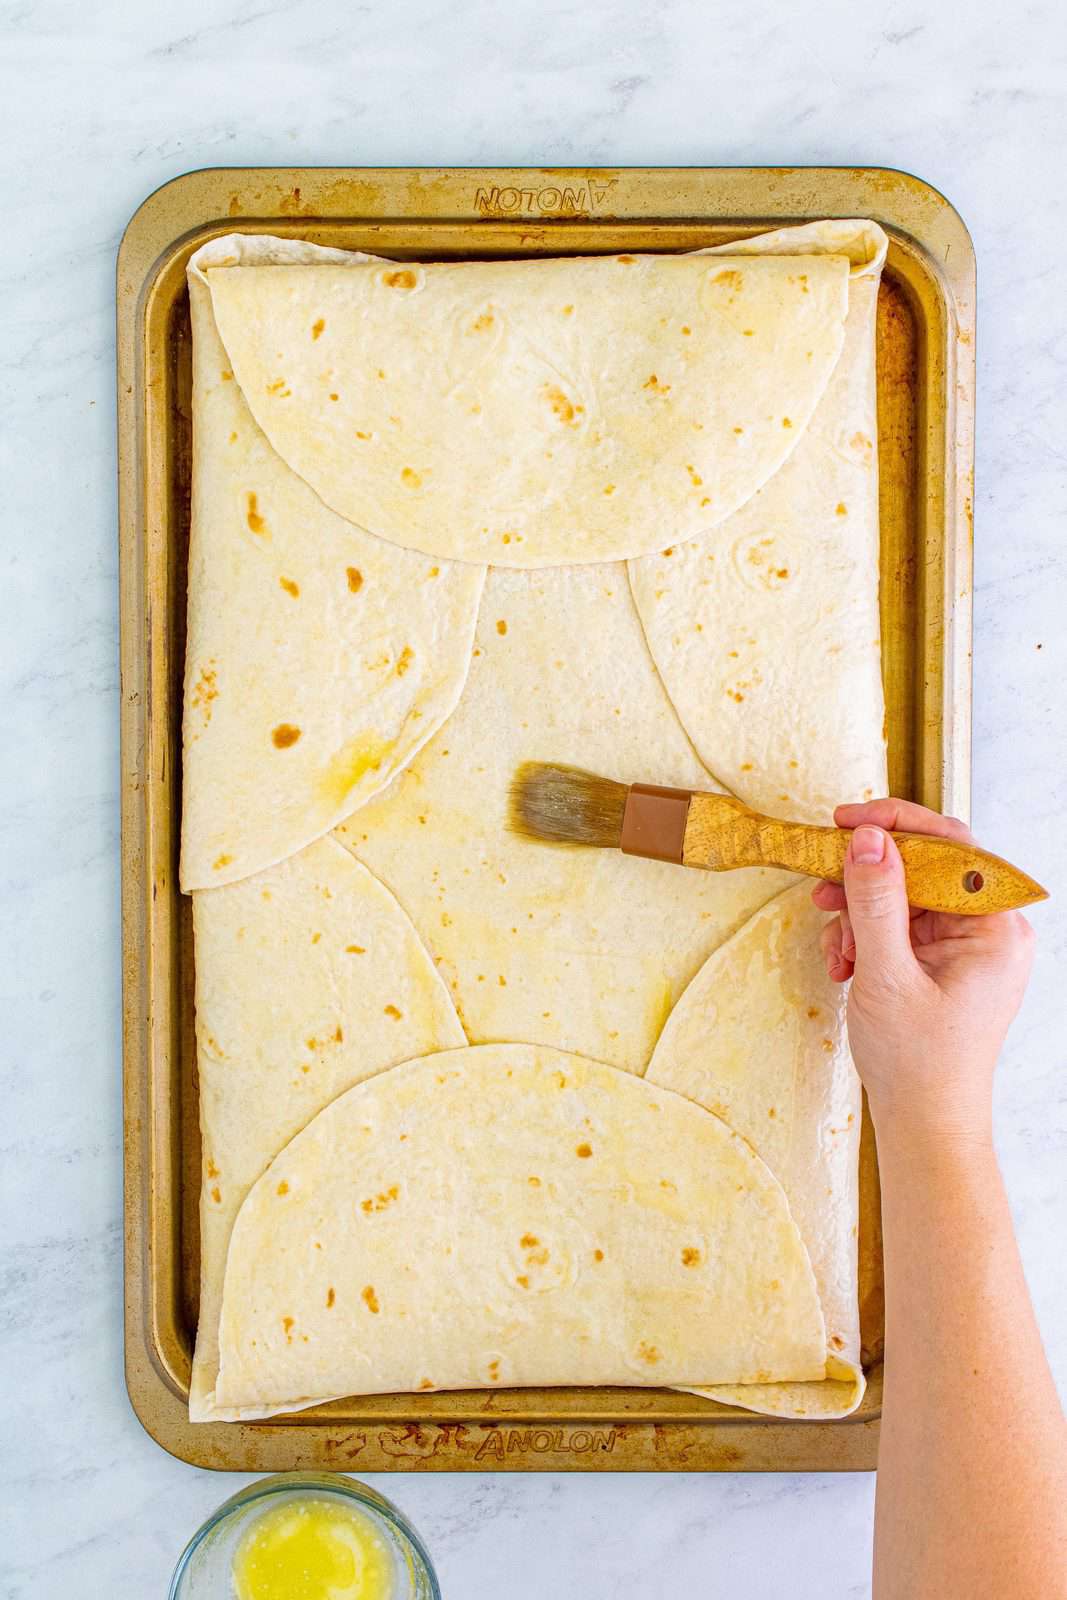 Butter being brushed over folded tortillas.